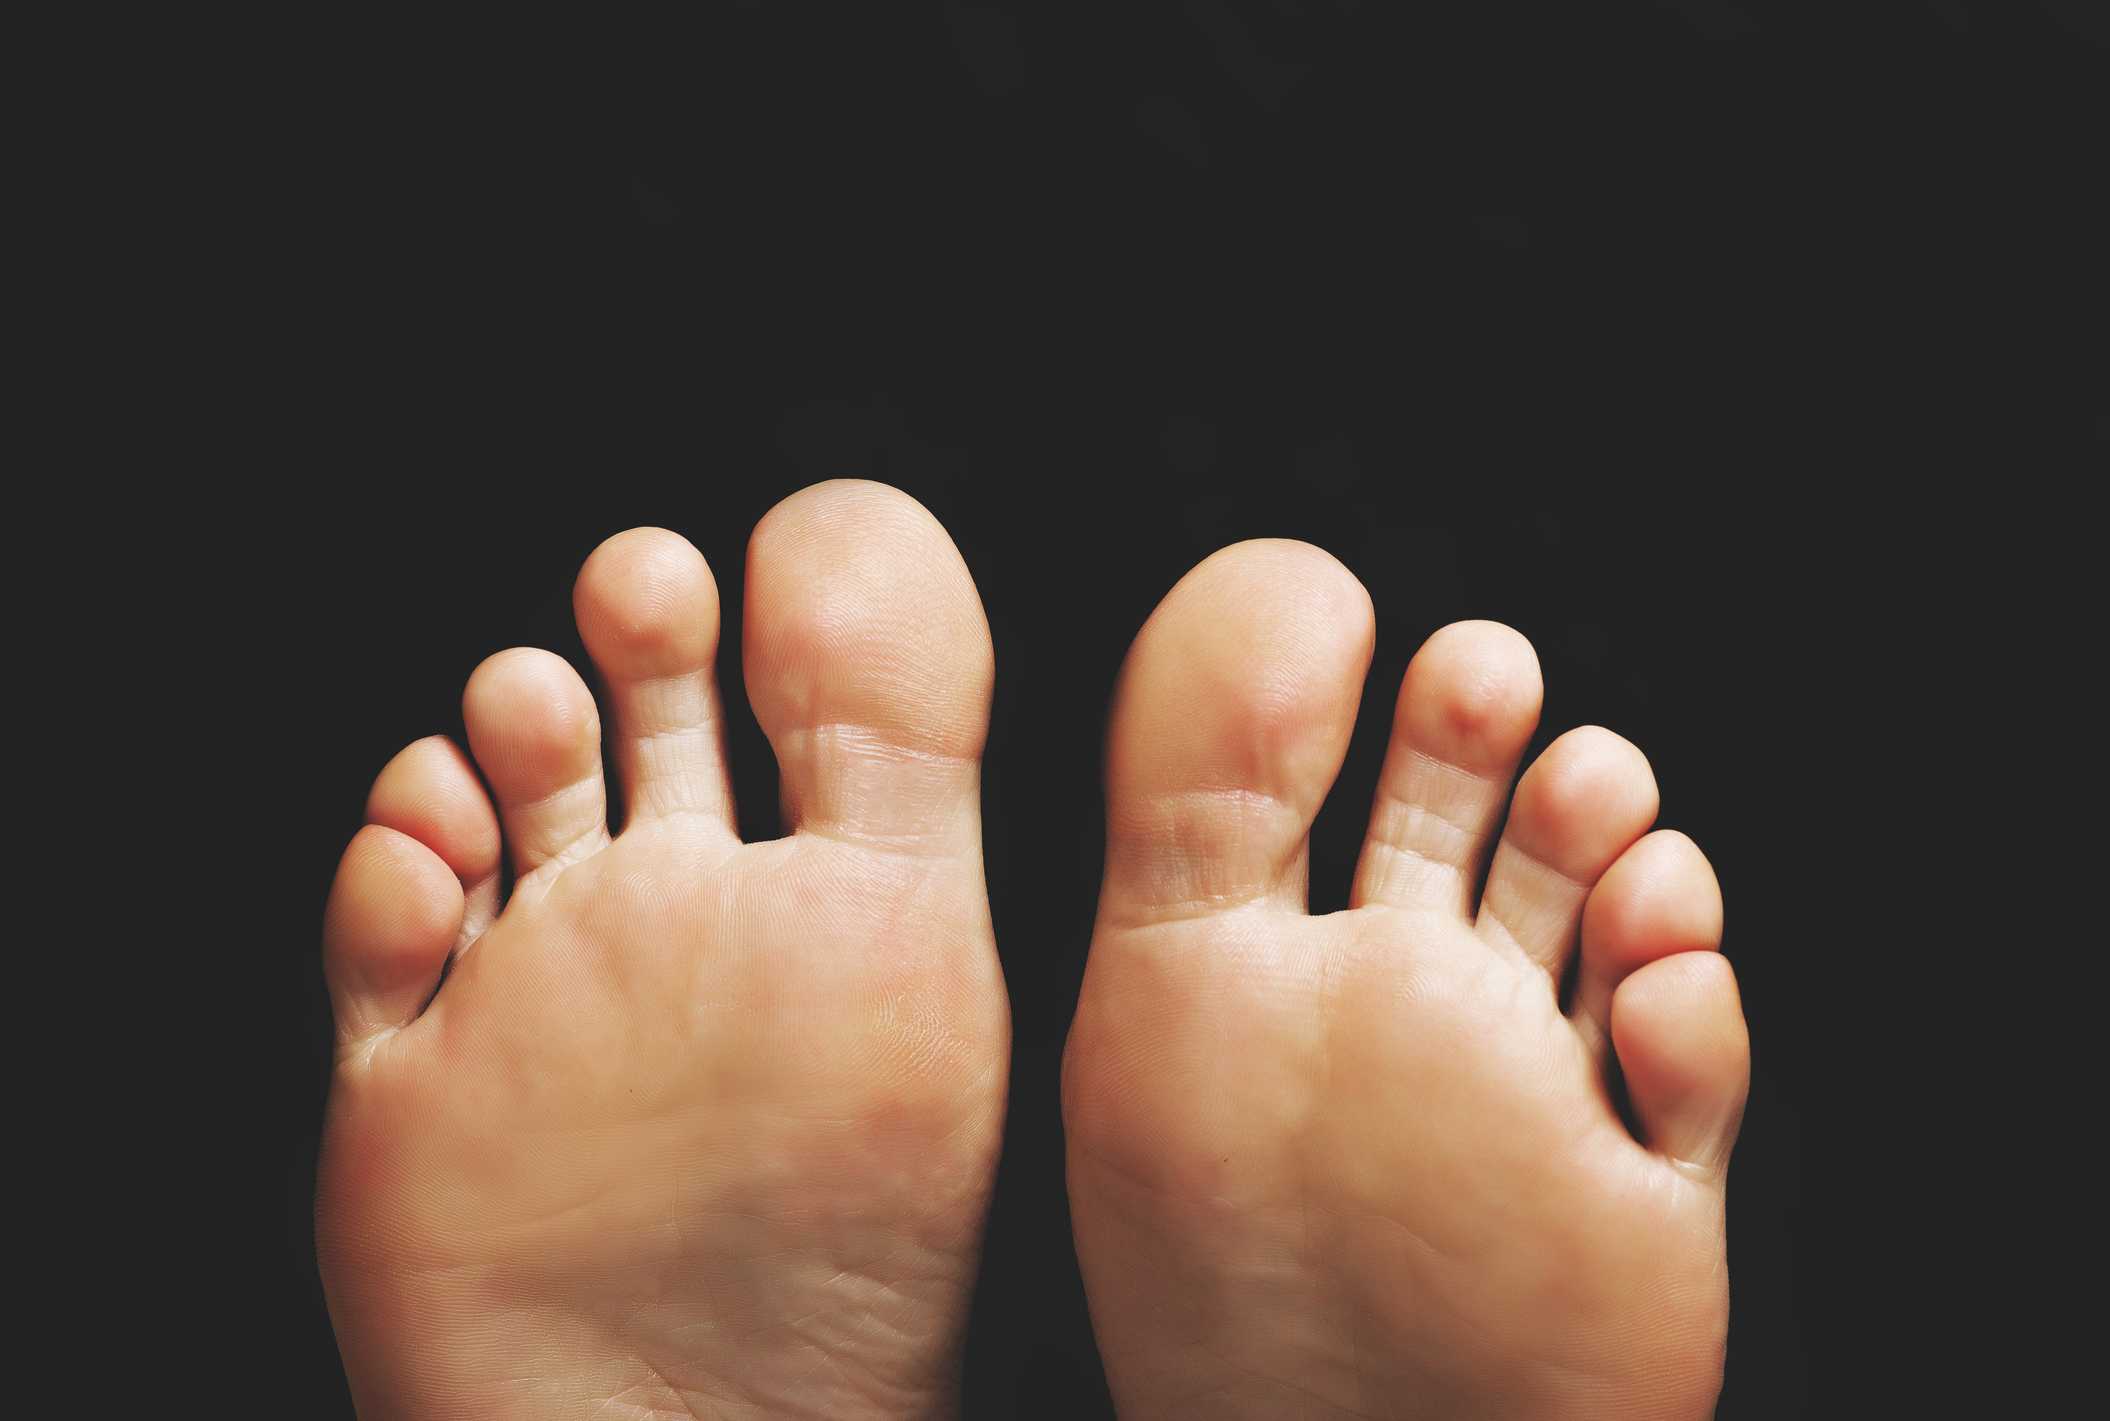 Symptoms Of Foot Damage And Common Foot Problems